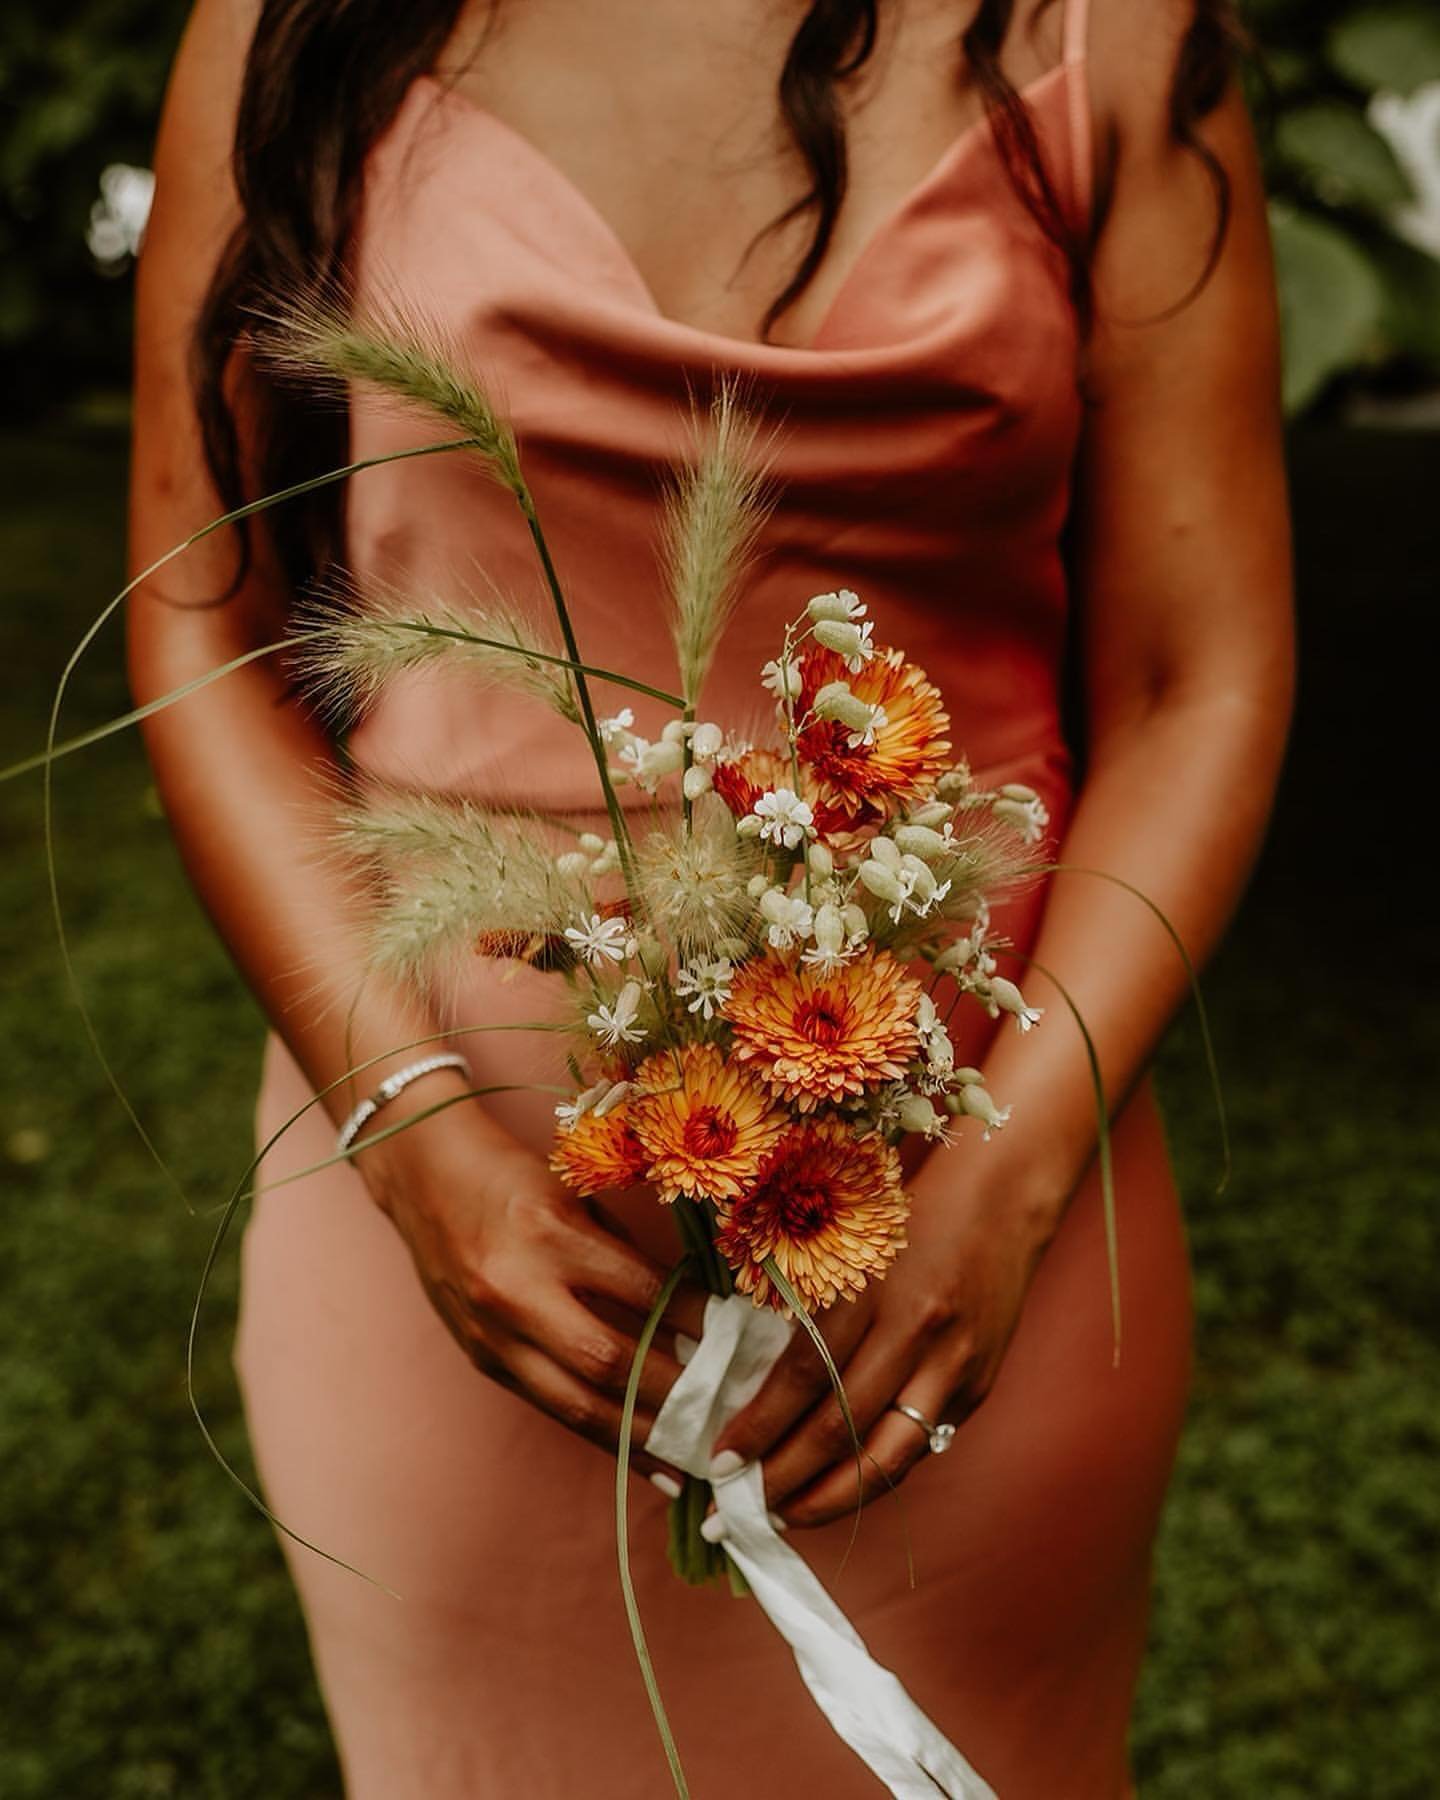 April showers bring May flowers! And in April we celebrate some of the amazing florists who bring your wedding inspiration to life! We just love it when the florals bring in wild and rustic elements that remind us of the farm and barn. Like these whi